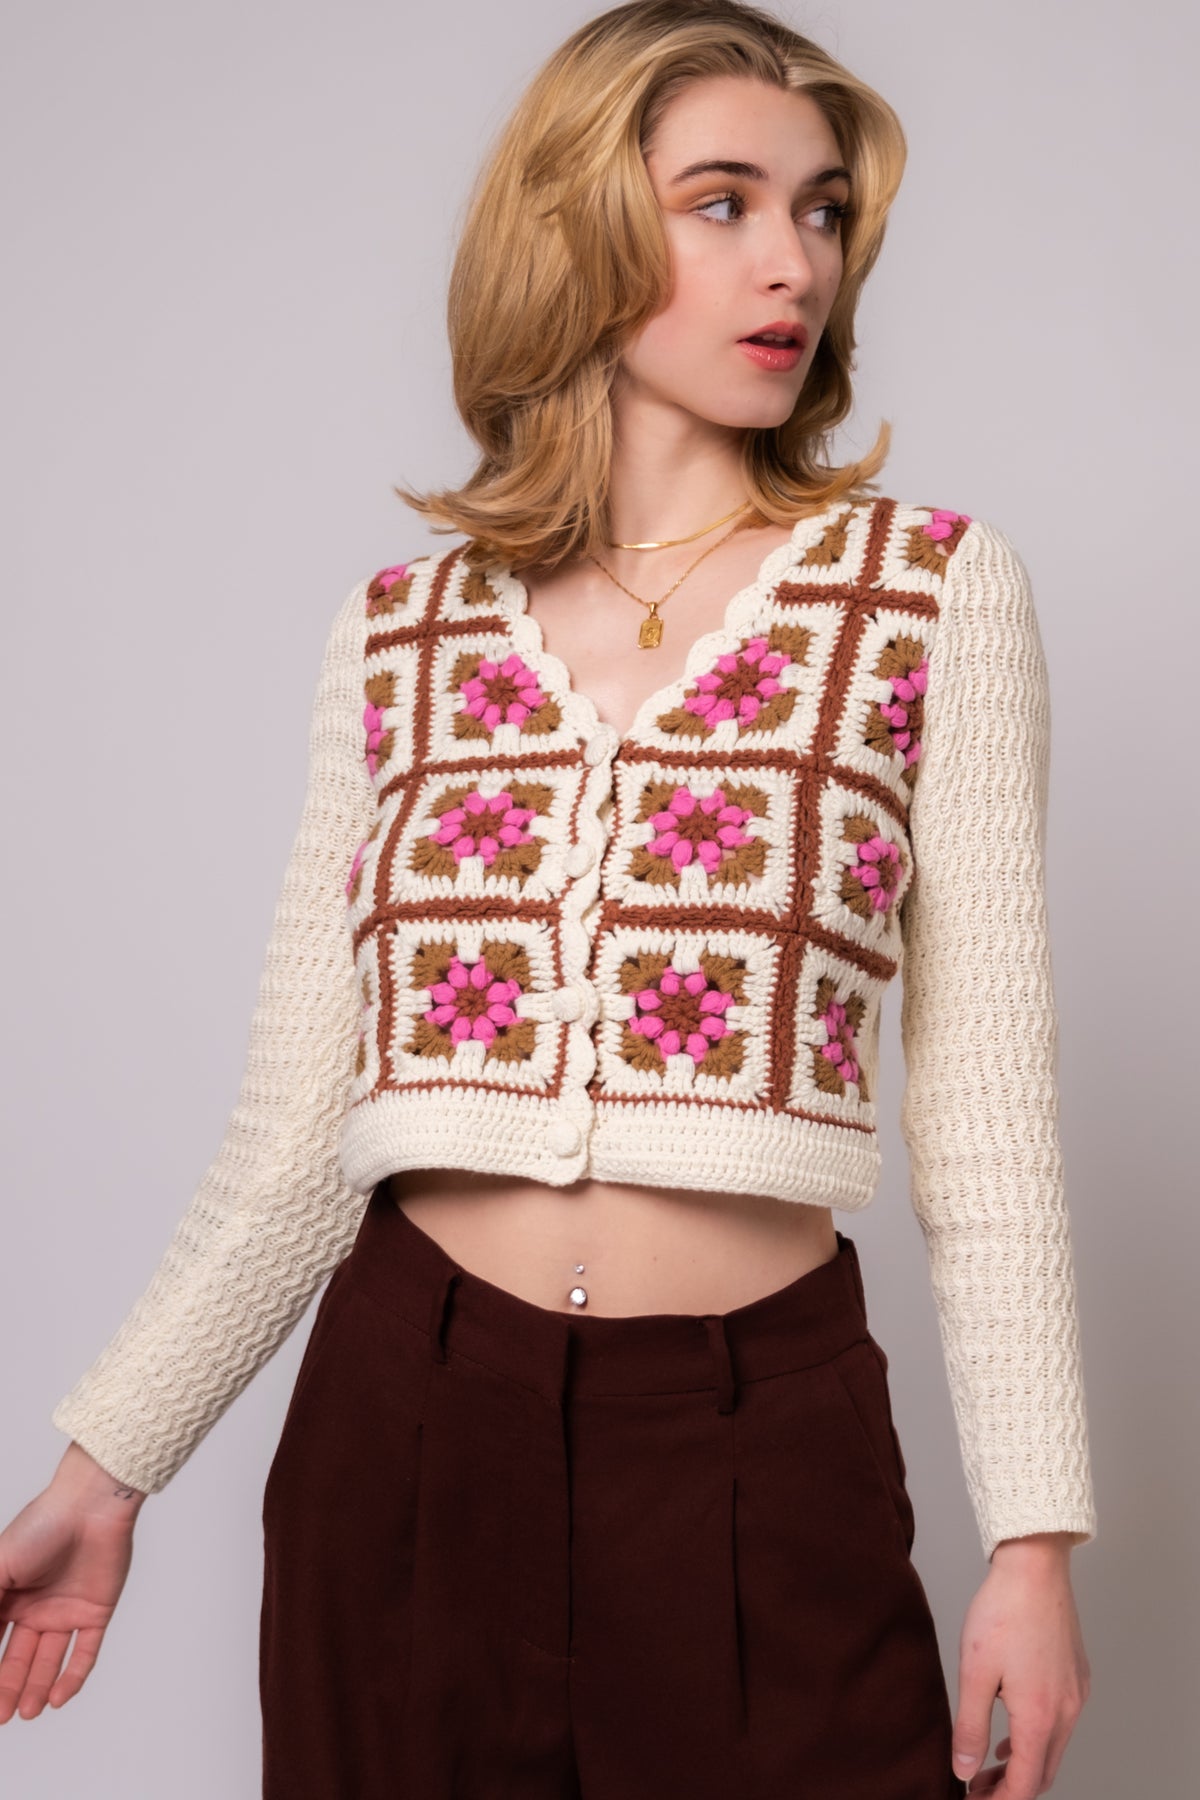 Saltwater Luxe Chels Crochet Square Cardi